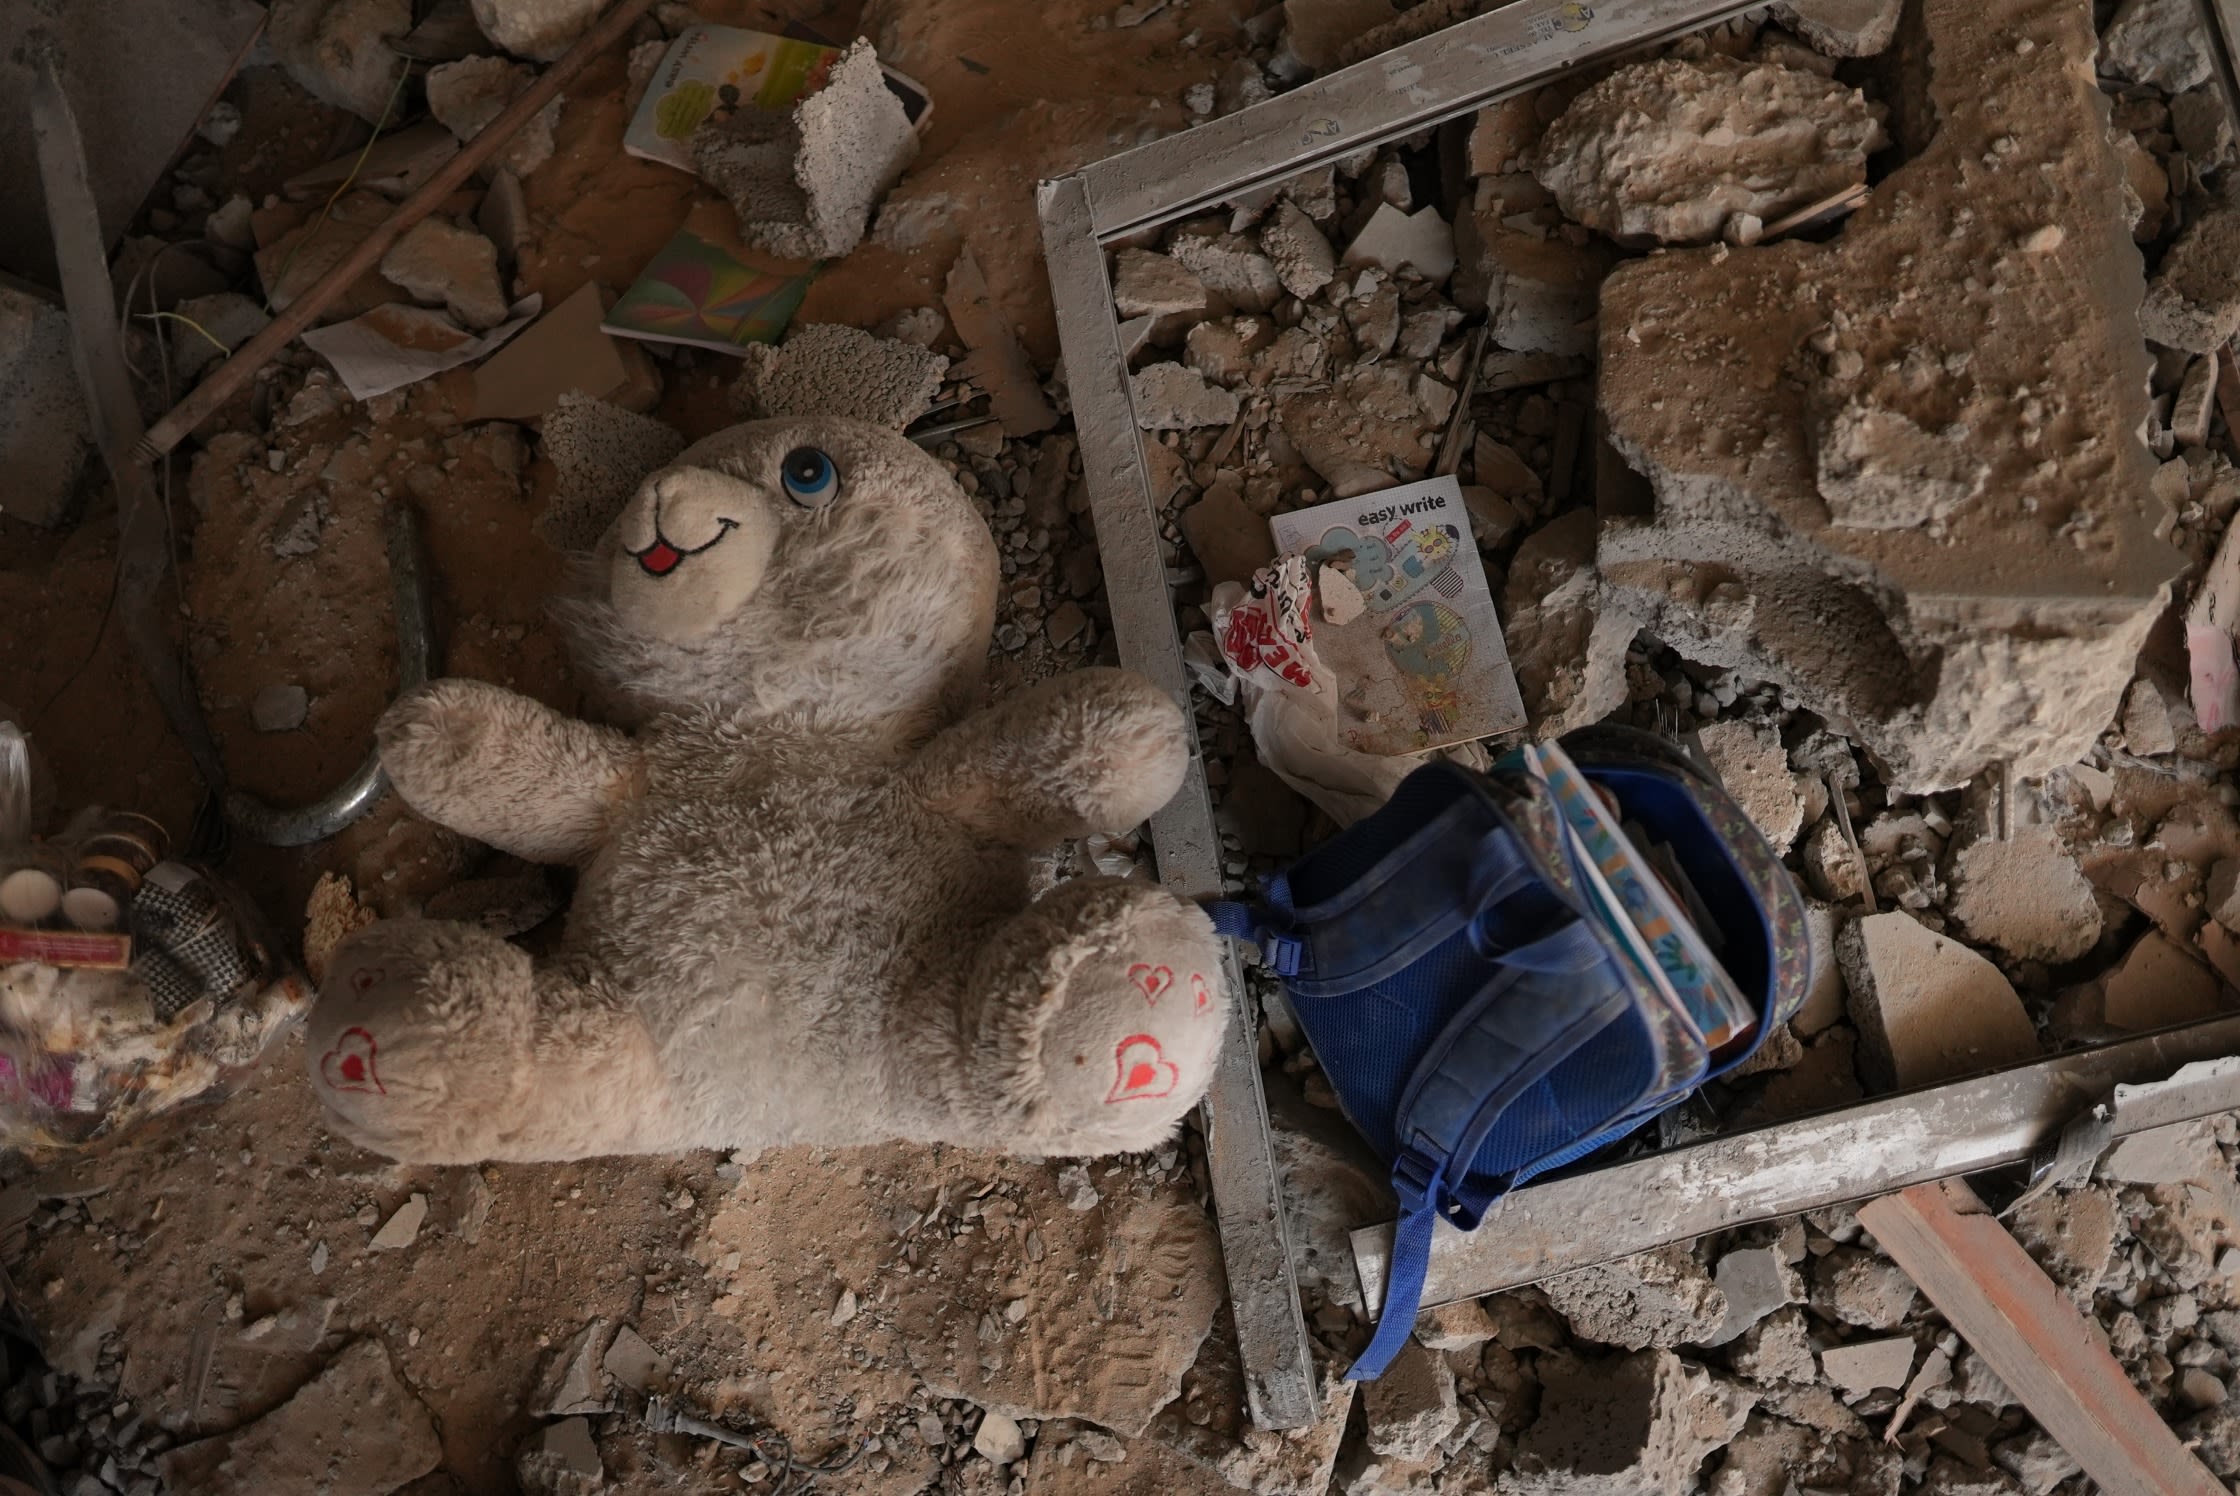 A child's school backpack and a doll amid rubble in Gaza